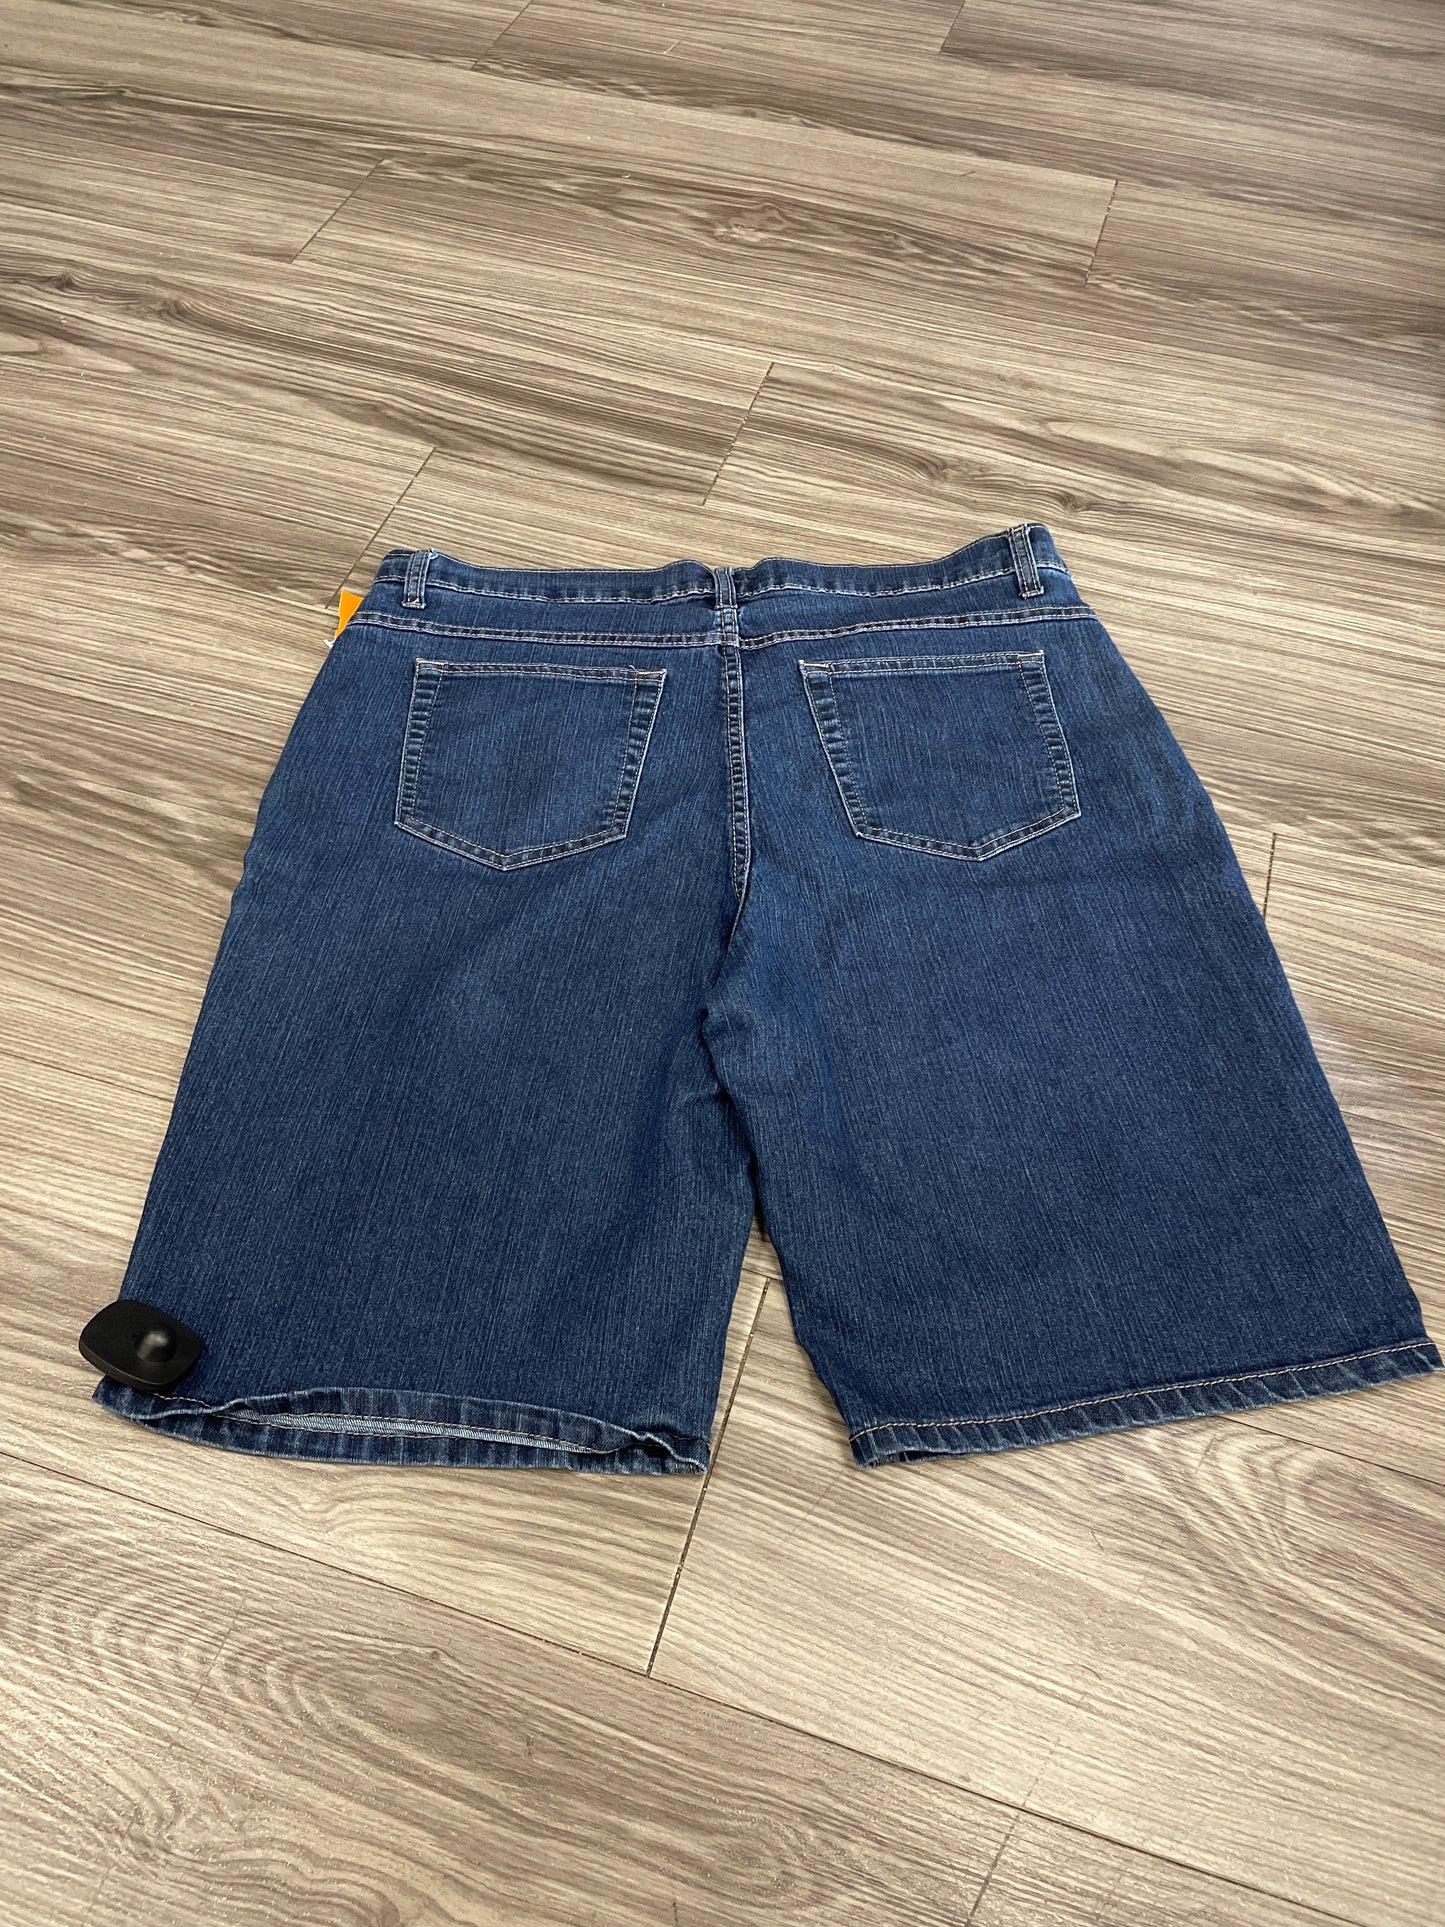 Shorts By Riders  Size: 18